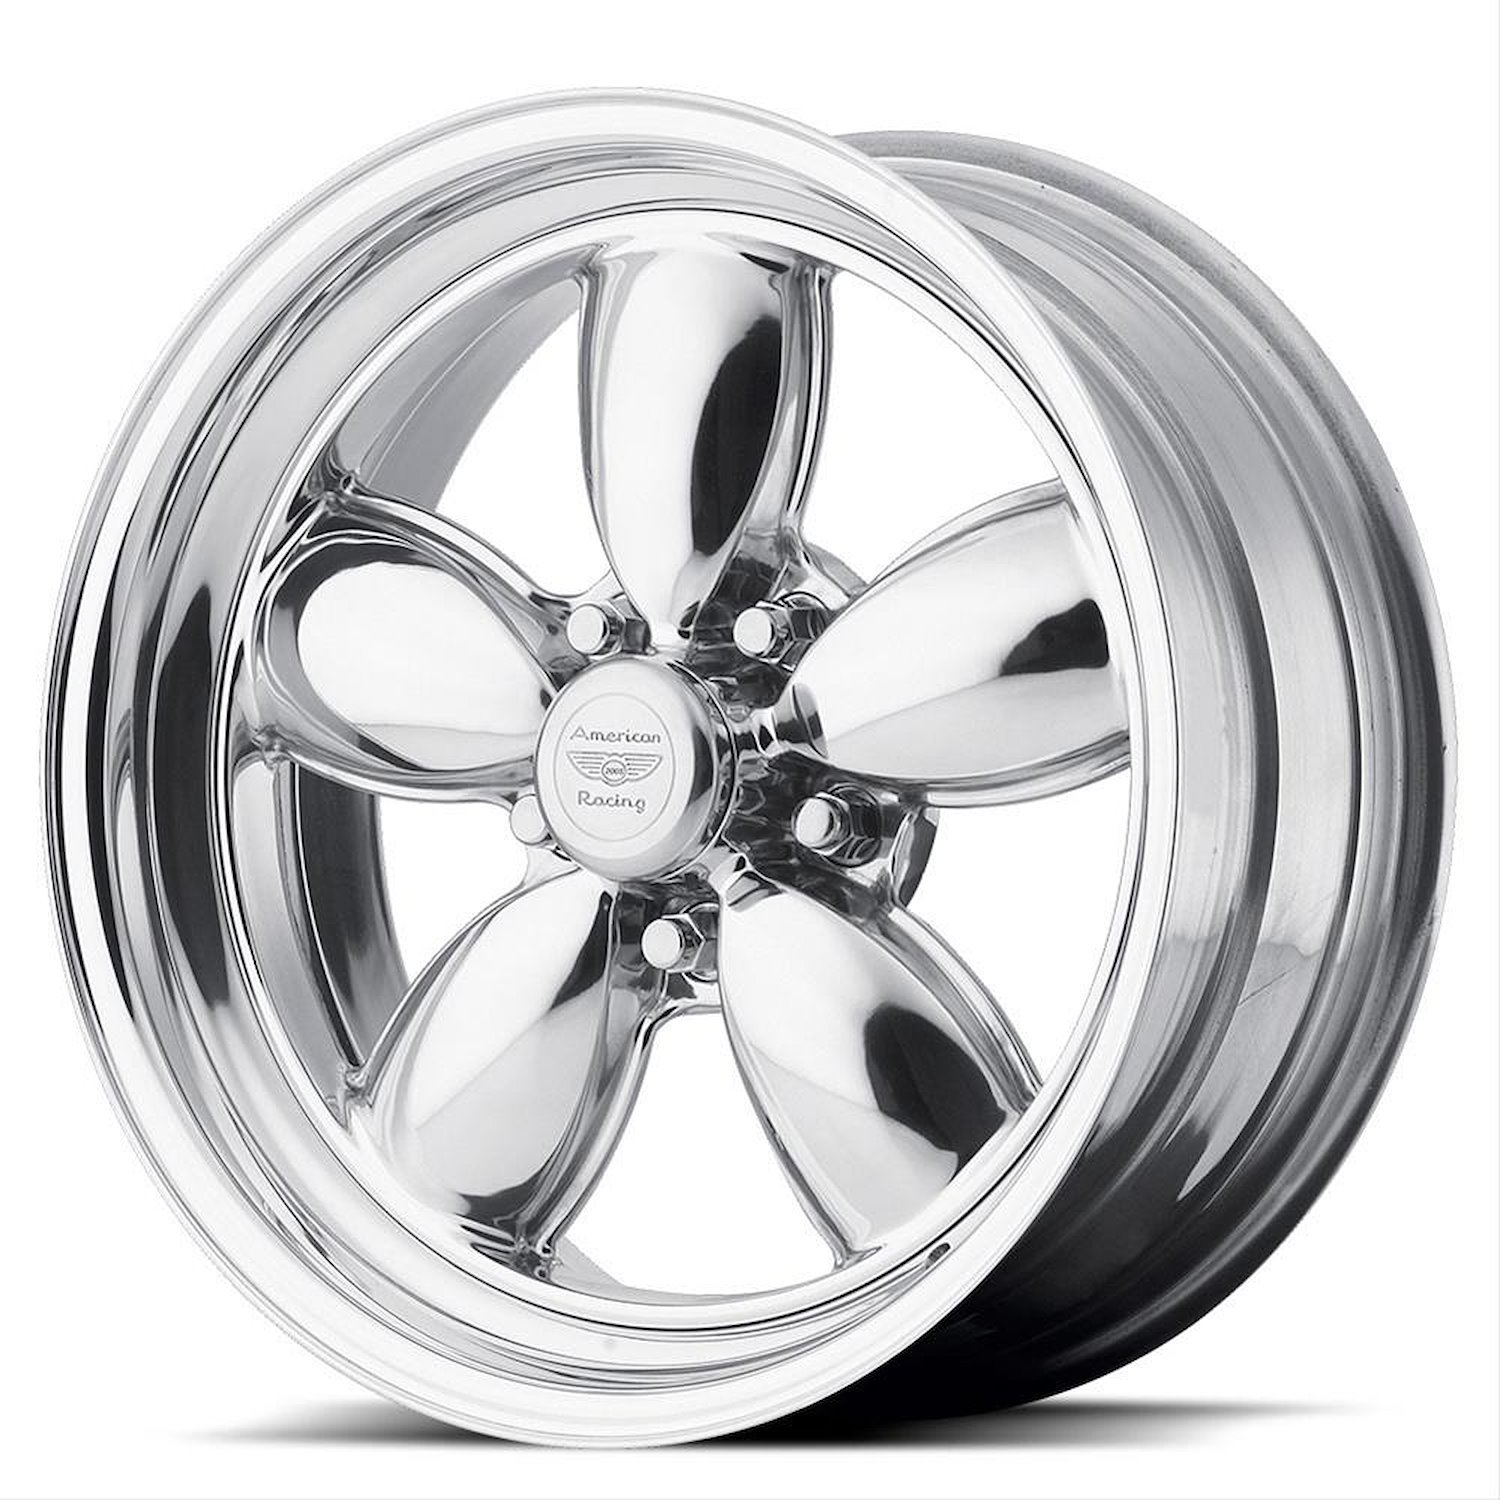 AMERICAN RACING CLASSIC 200S TWO-PIECE POLISHED 15 x 7 5x4.5 -6 3.76